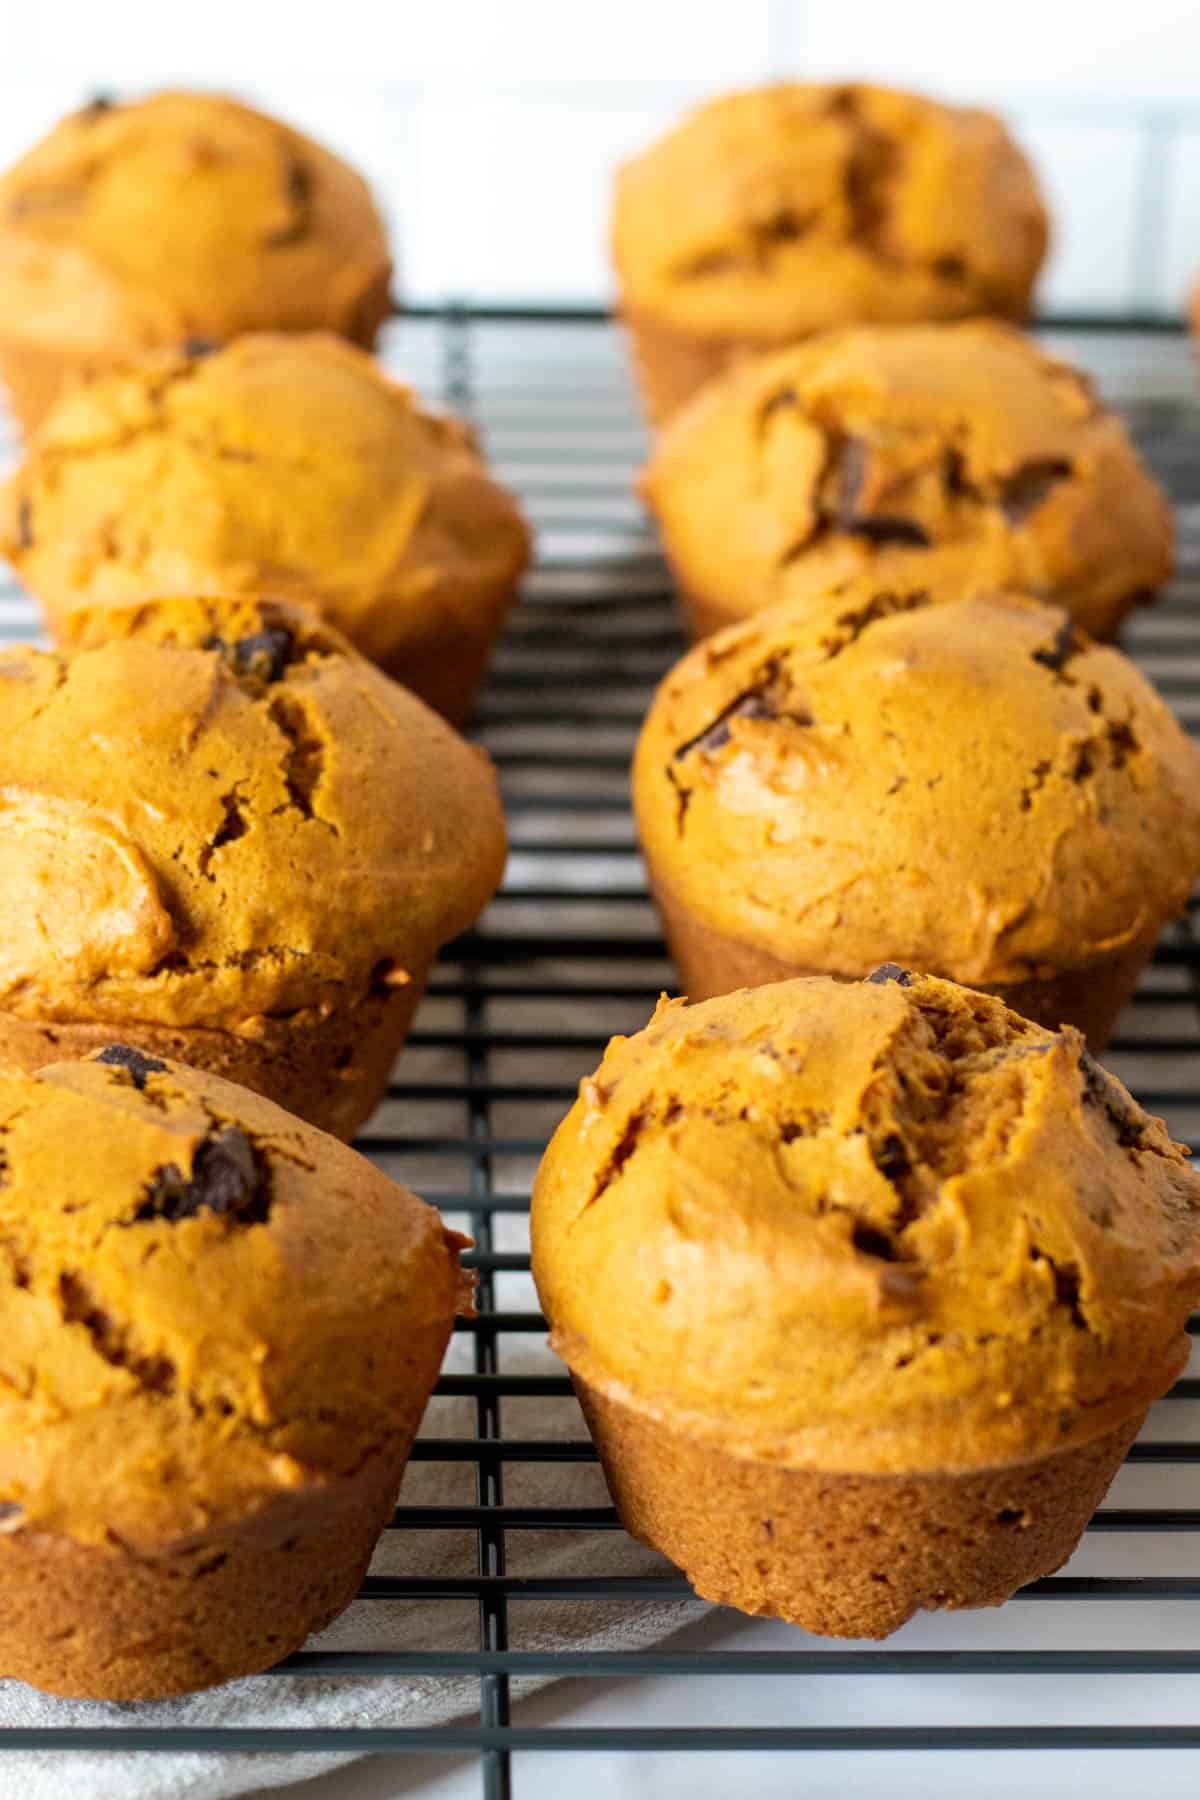 Muffins cooling on a rack.